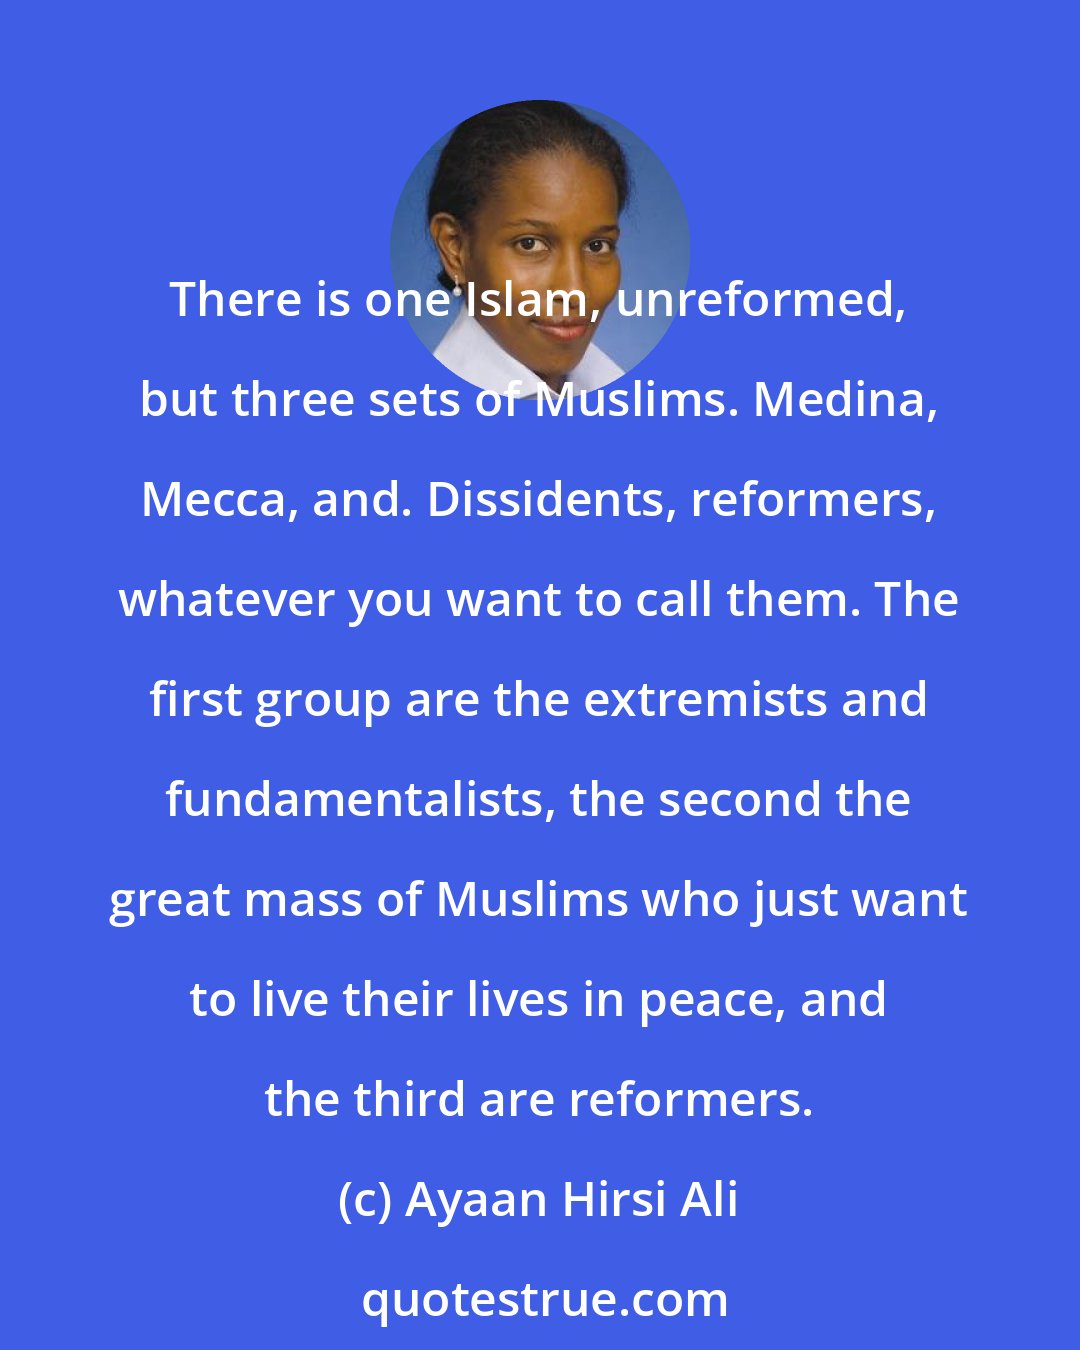 Ayaan Hirsi Ali: There is one Islam, unreformed, but three sets of Muslims. Medina, Mecca, and. Dissidents, reformers, whatever you want to call them. The first group are the extremists and fundamentalists, the second the great mass of Muslims who just want to live their lives in peace, and the third are reformers.